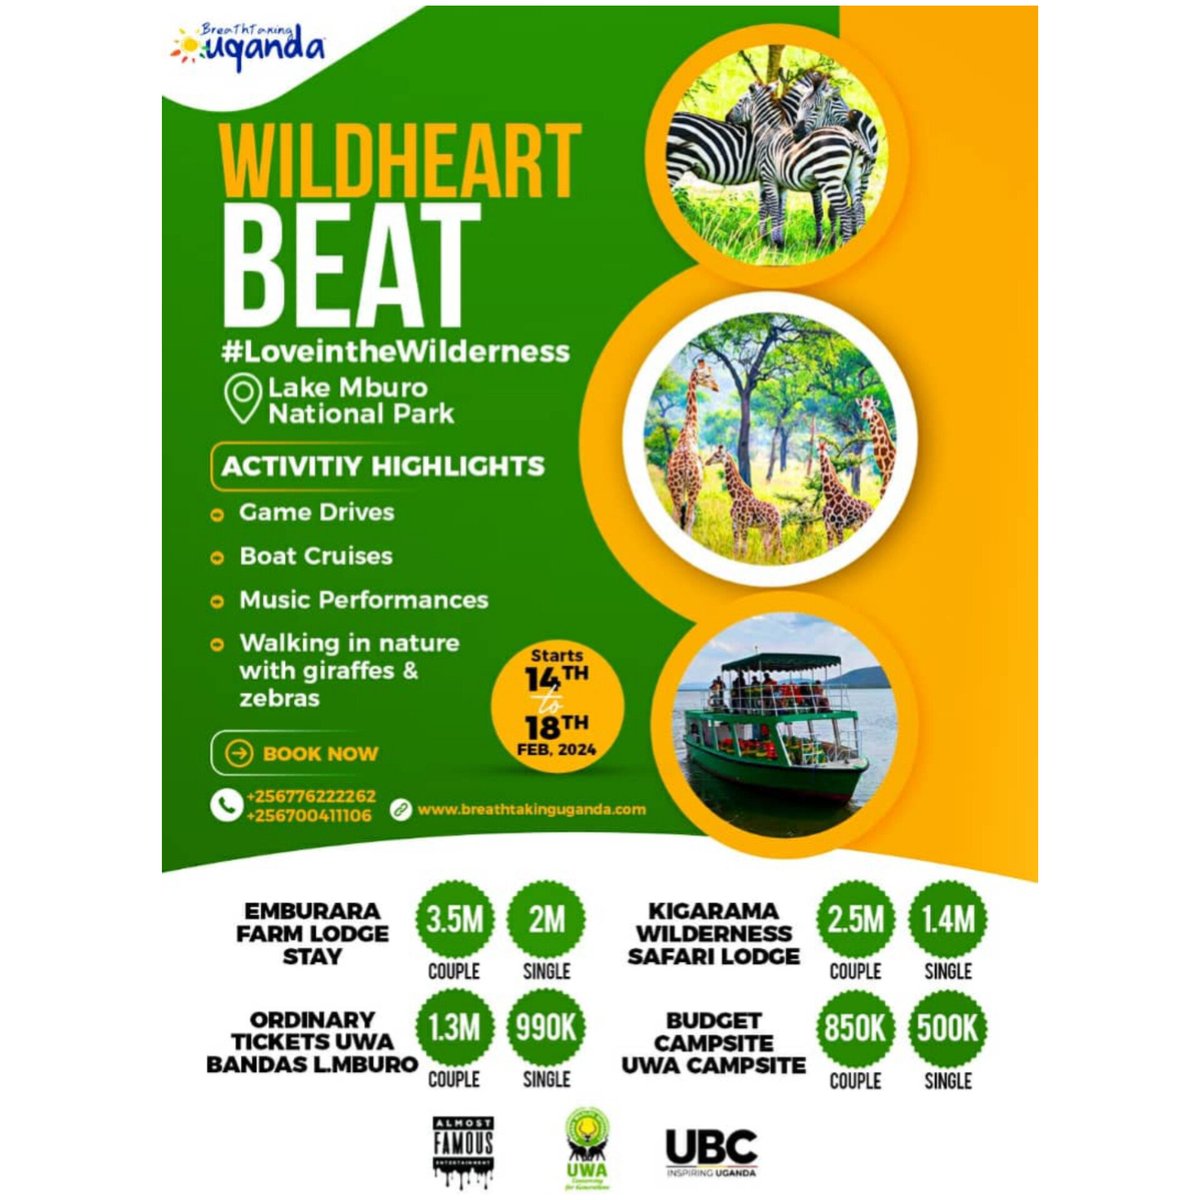 Celebrate the month of love with #Breathtakinguganda treat your loved one to something special this valentines.
#AwildHeartBeatExperience
#LoveintheWilderness
#Breathtakinguganda